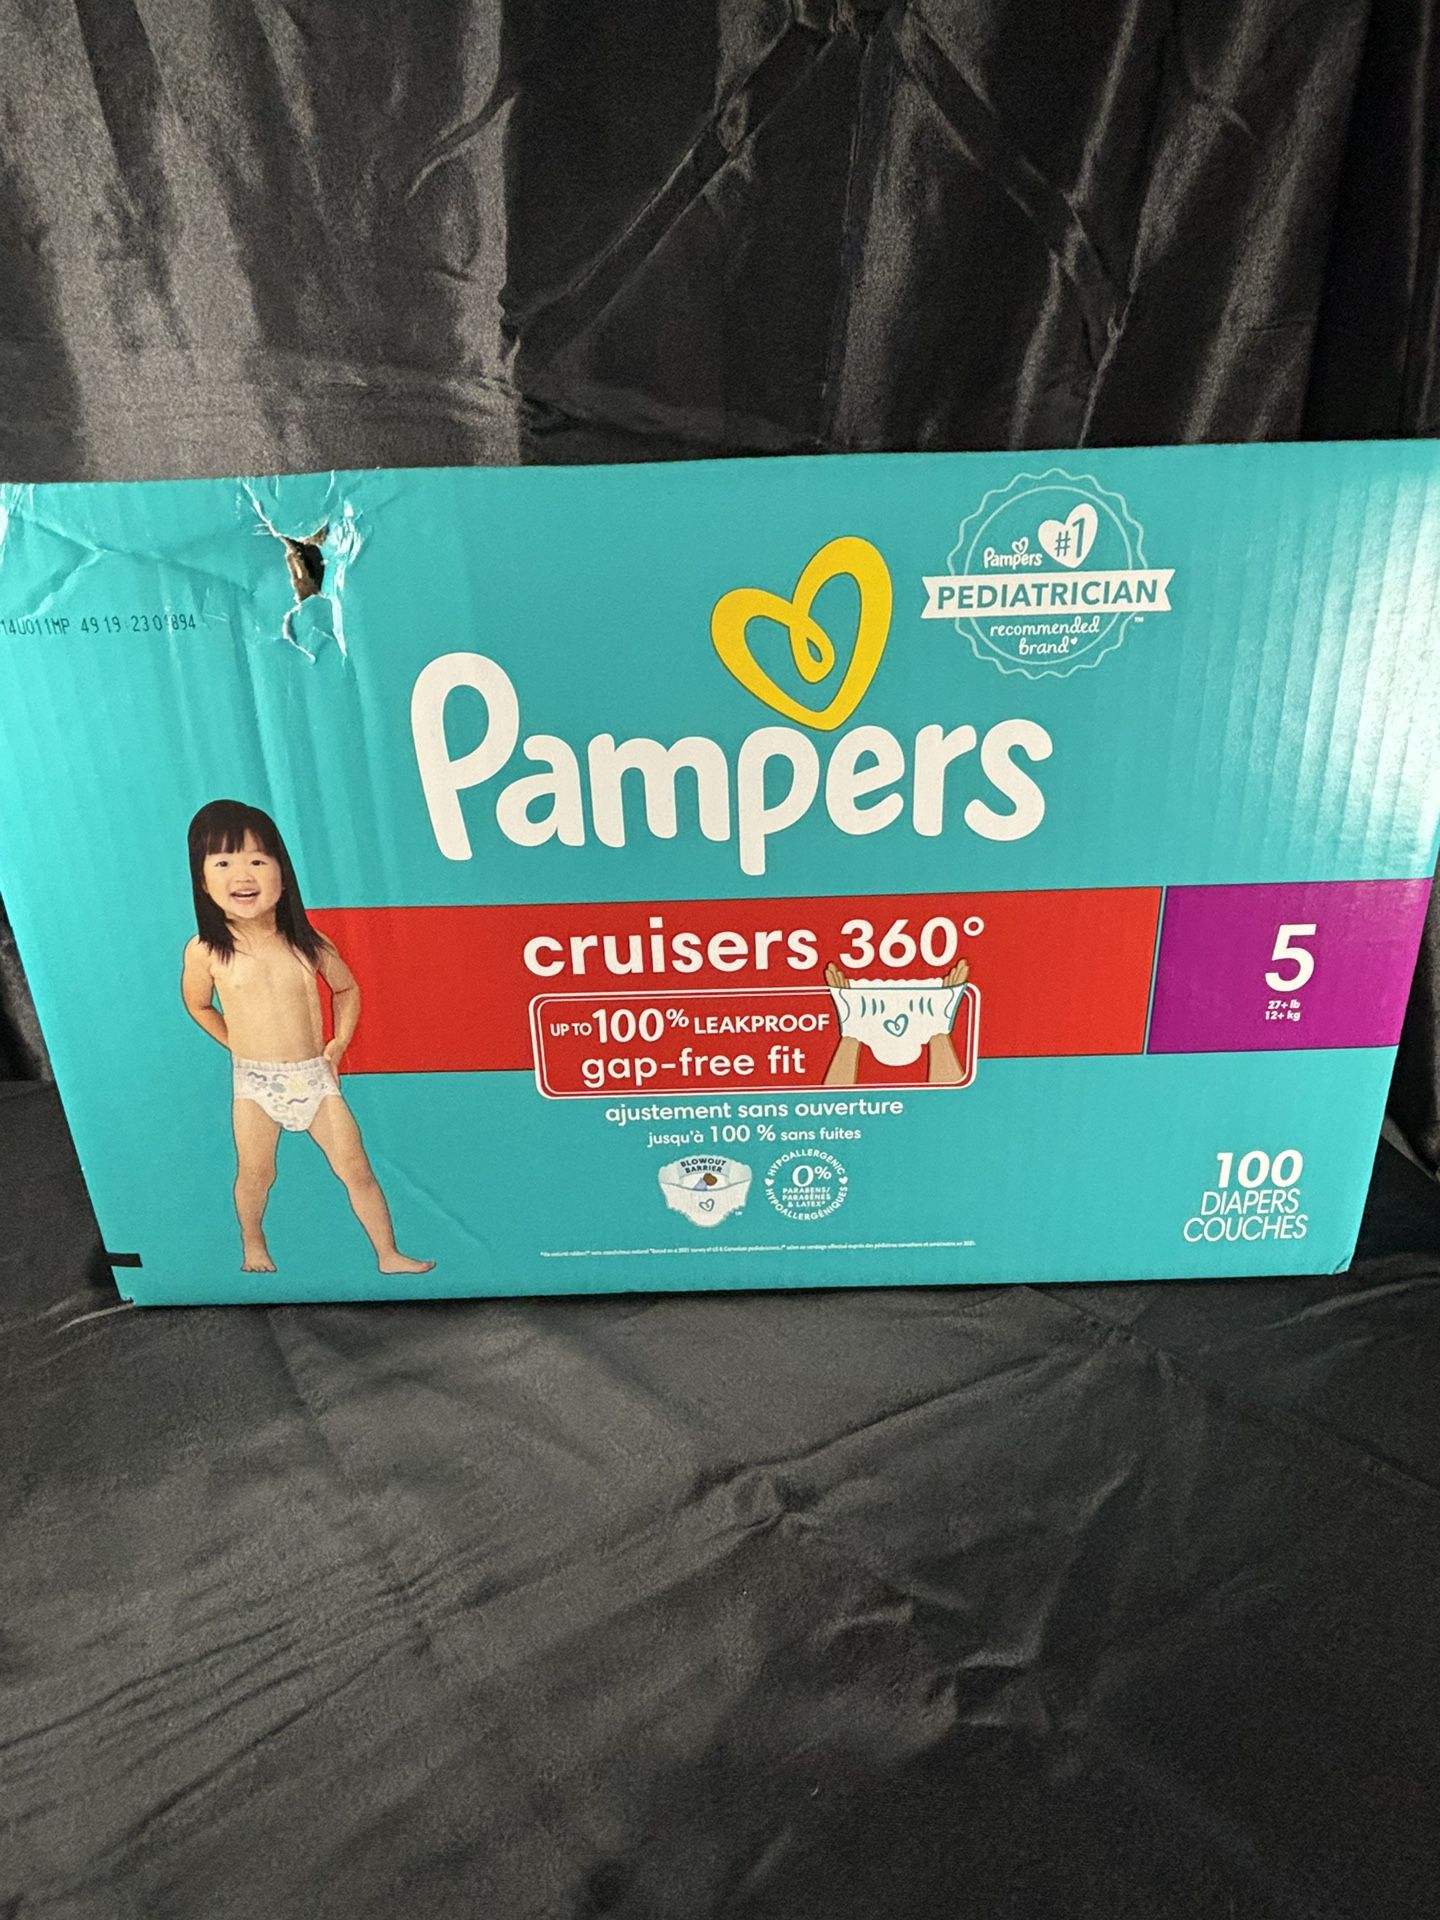 Pampers Cruisers 360 Diapers - Size 5 - 100 Count * Beat Up Box*